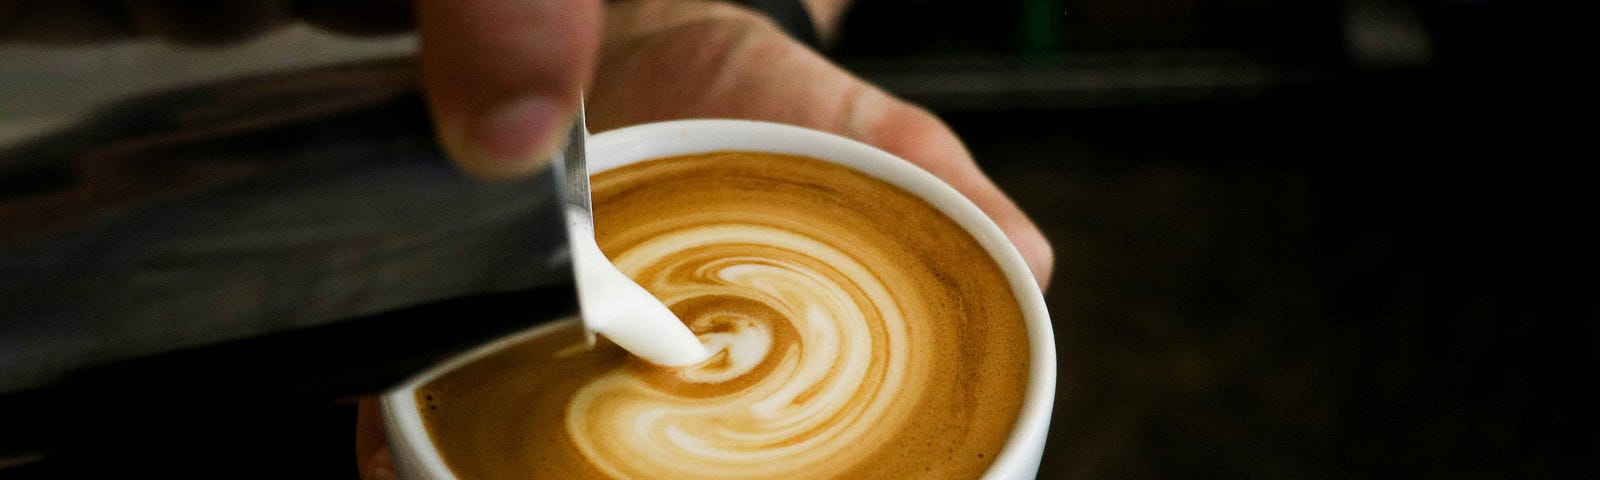 A cafe latte in someone’s left hand while the right hand pours cream.